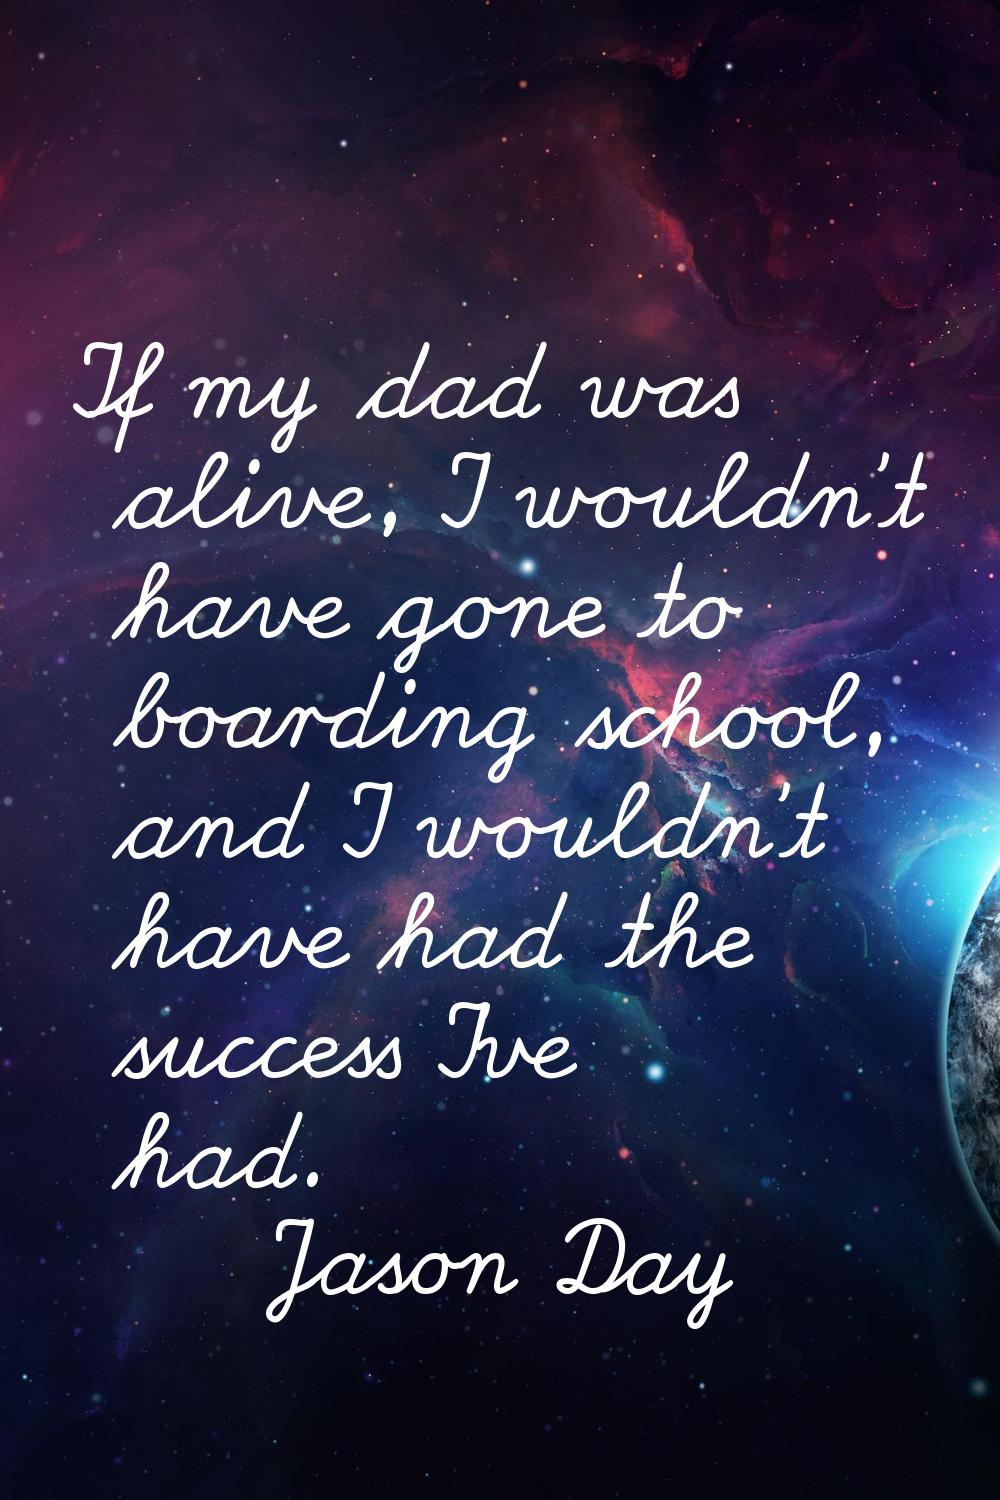 If my dad was alive, I wouldn't have gone to boarding school, and I wouldn't have had the success I